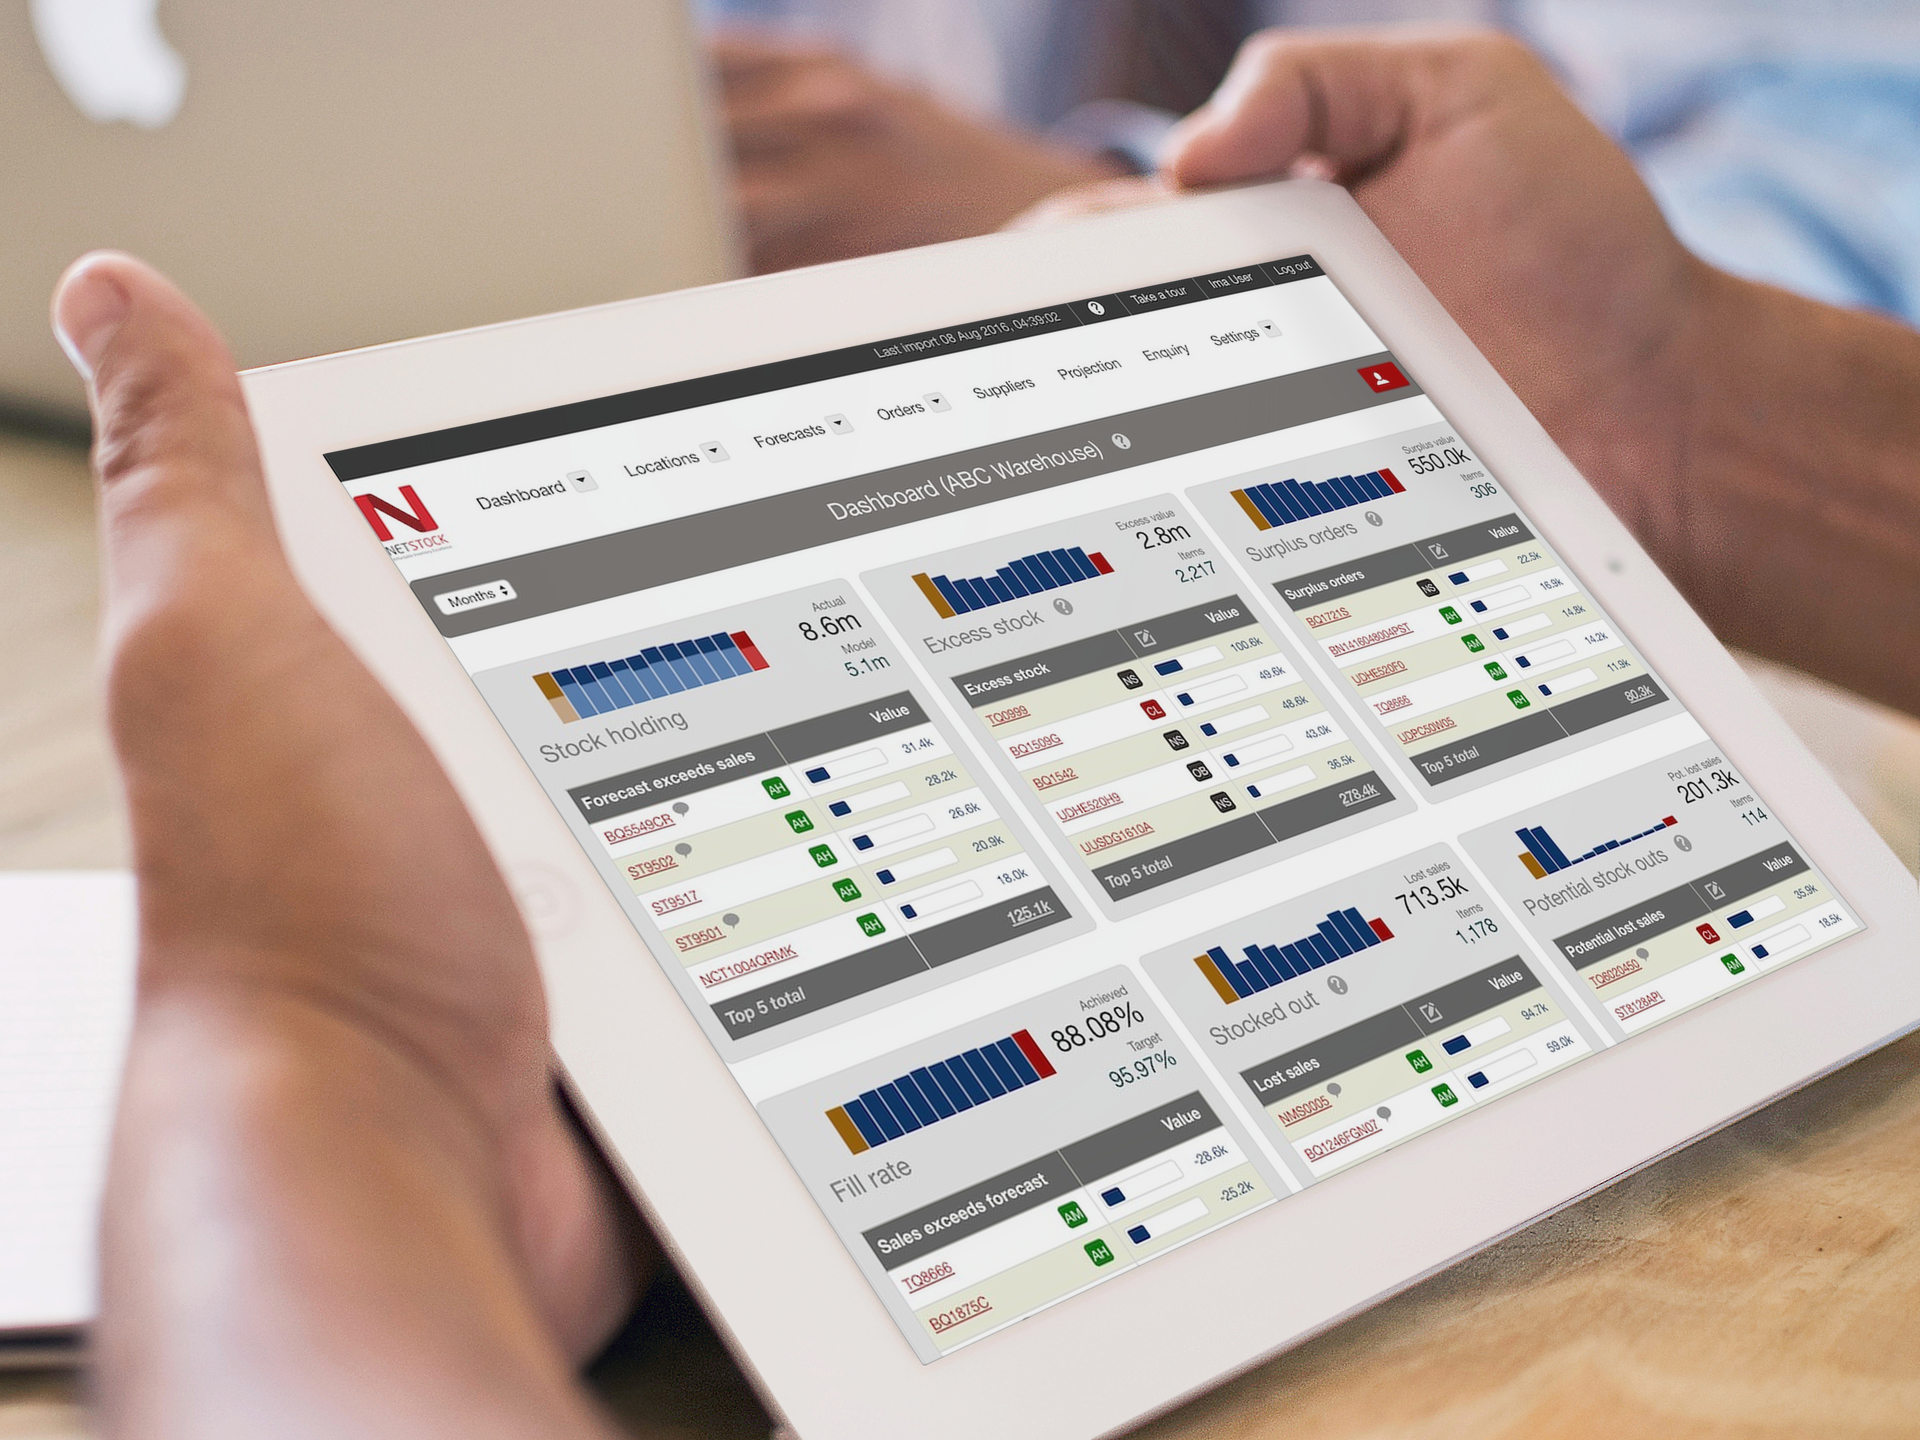 NETSTOCK delivers inventory optimization to any device, anytime via the cloud